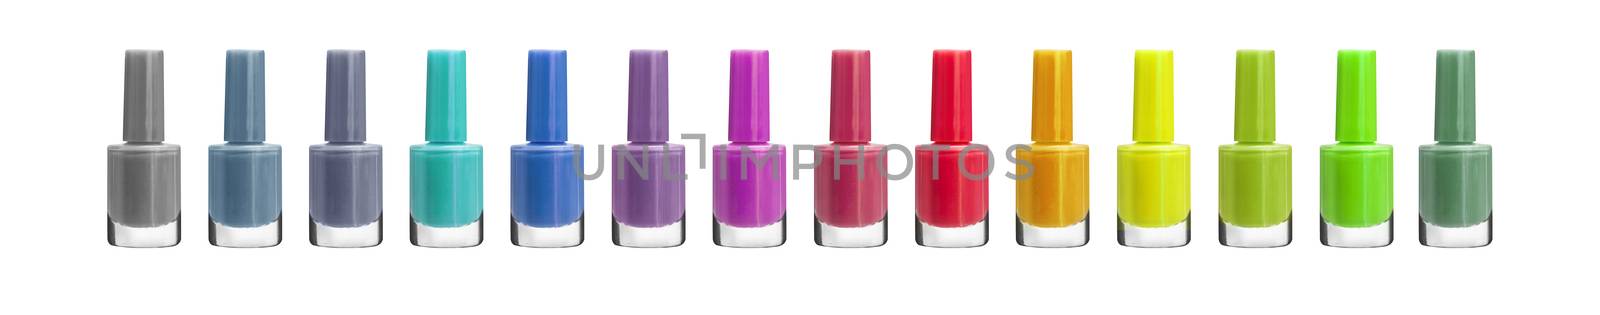 Group of bright color nail polishes  by SlayCer